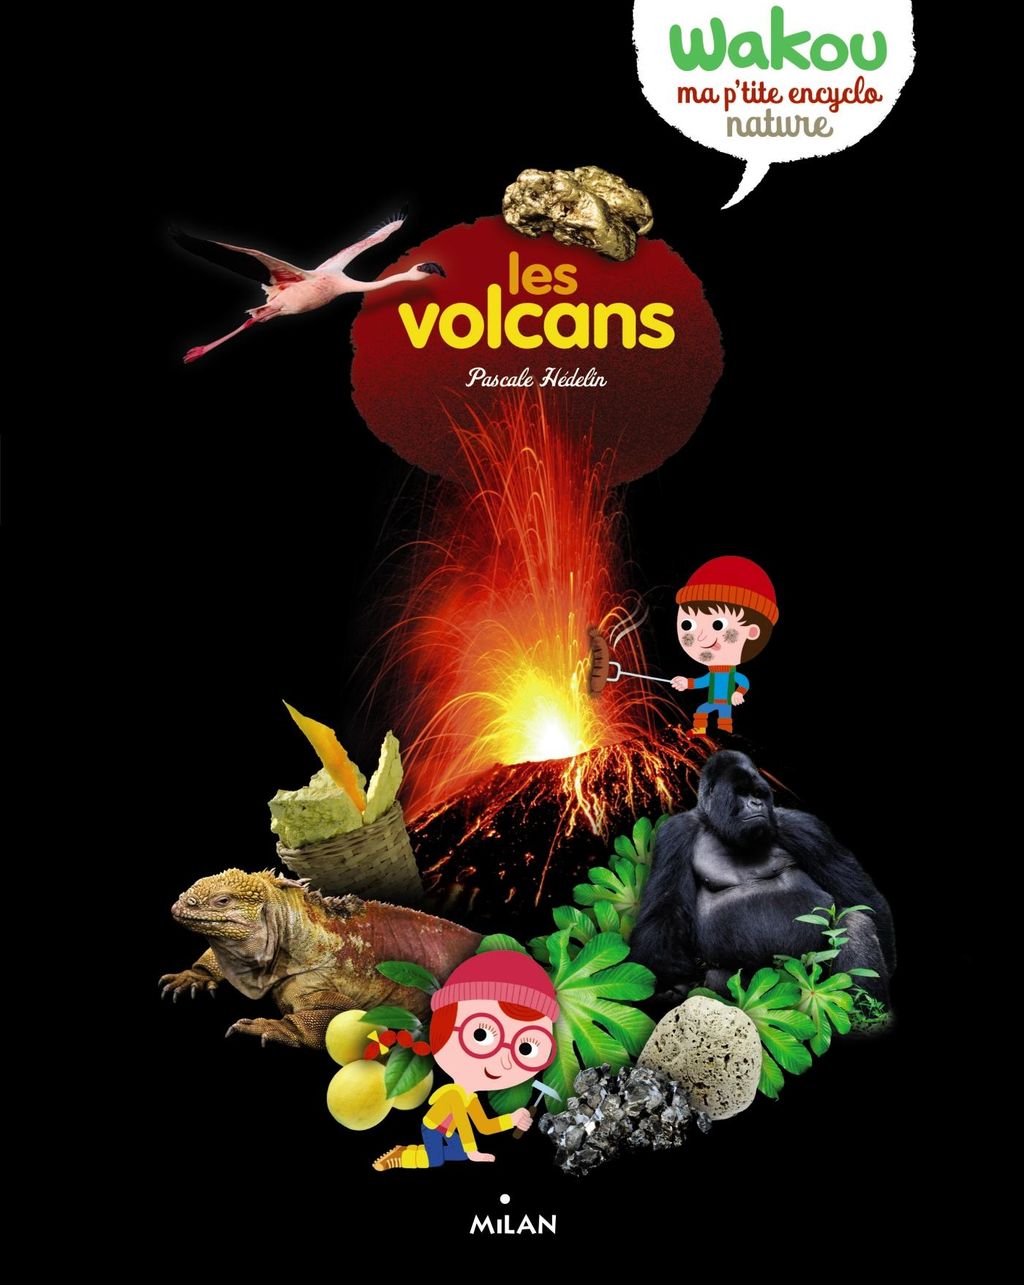 « Les volcans » cover